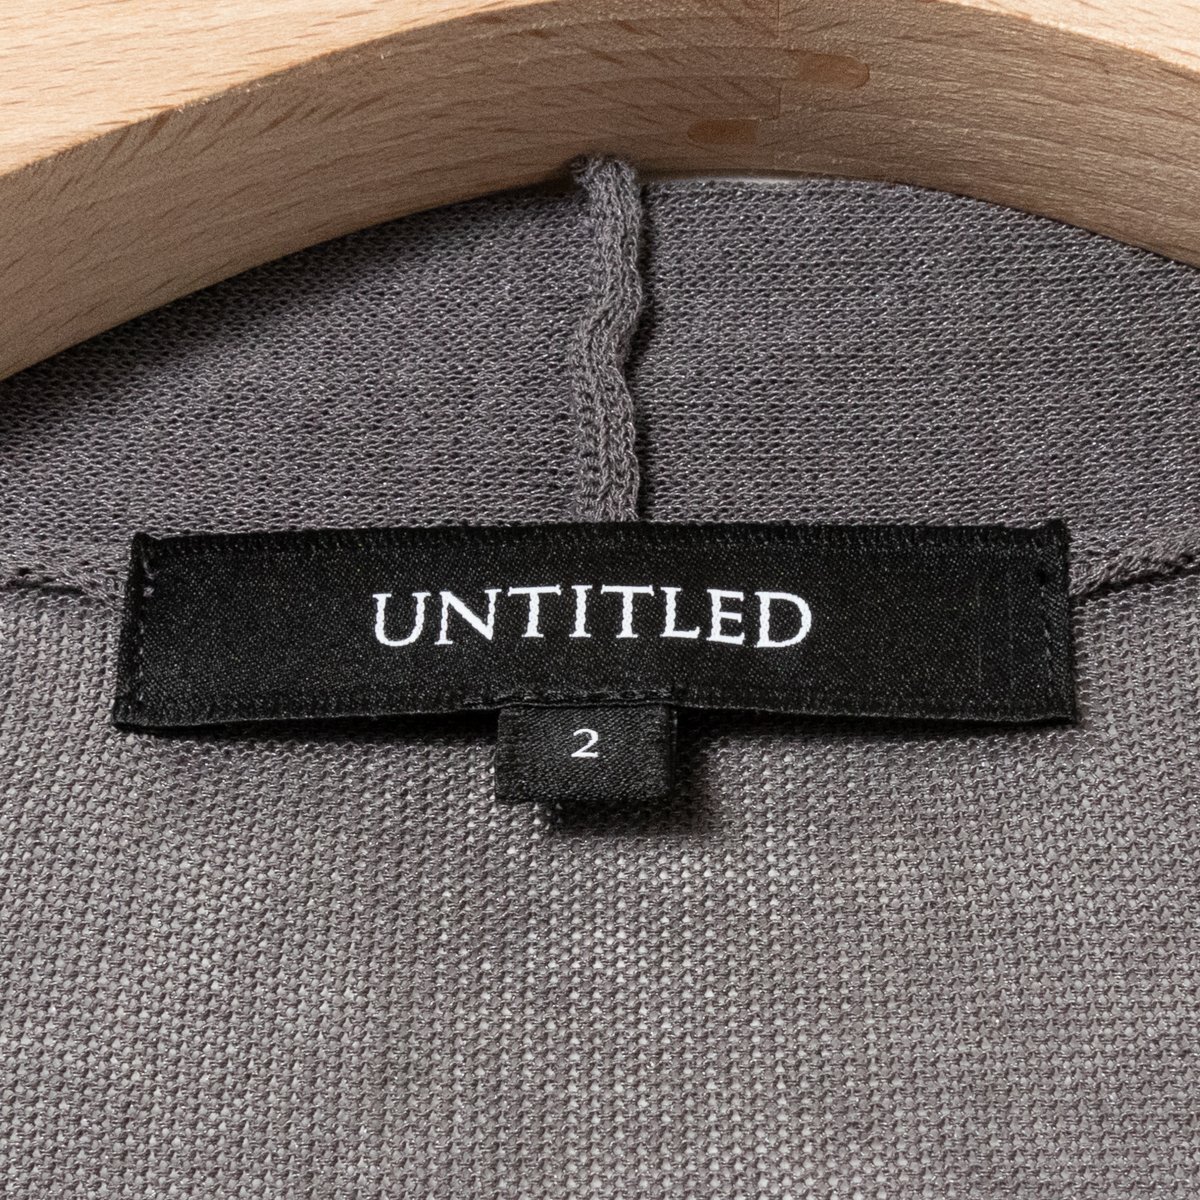 UNTITLED Untitled long cardigan long sleeve plain light chicken wings woven sunshade 2 cotton cotton charcoal gray beautiful . simple casual spring summer 